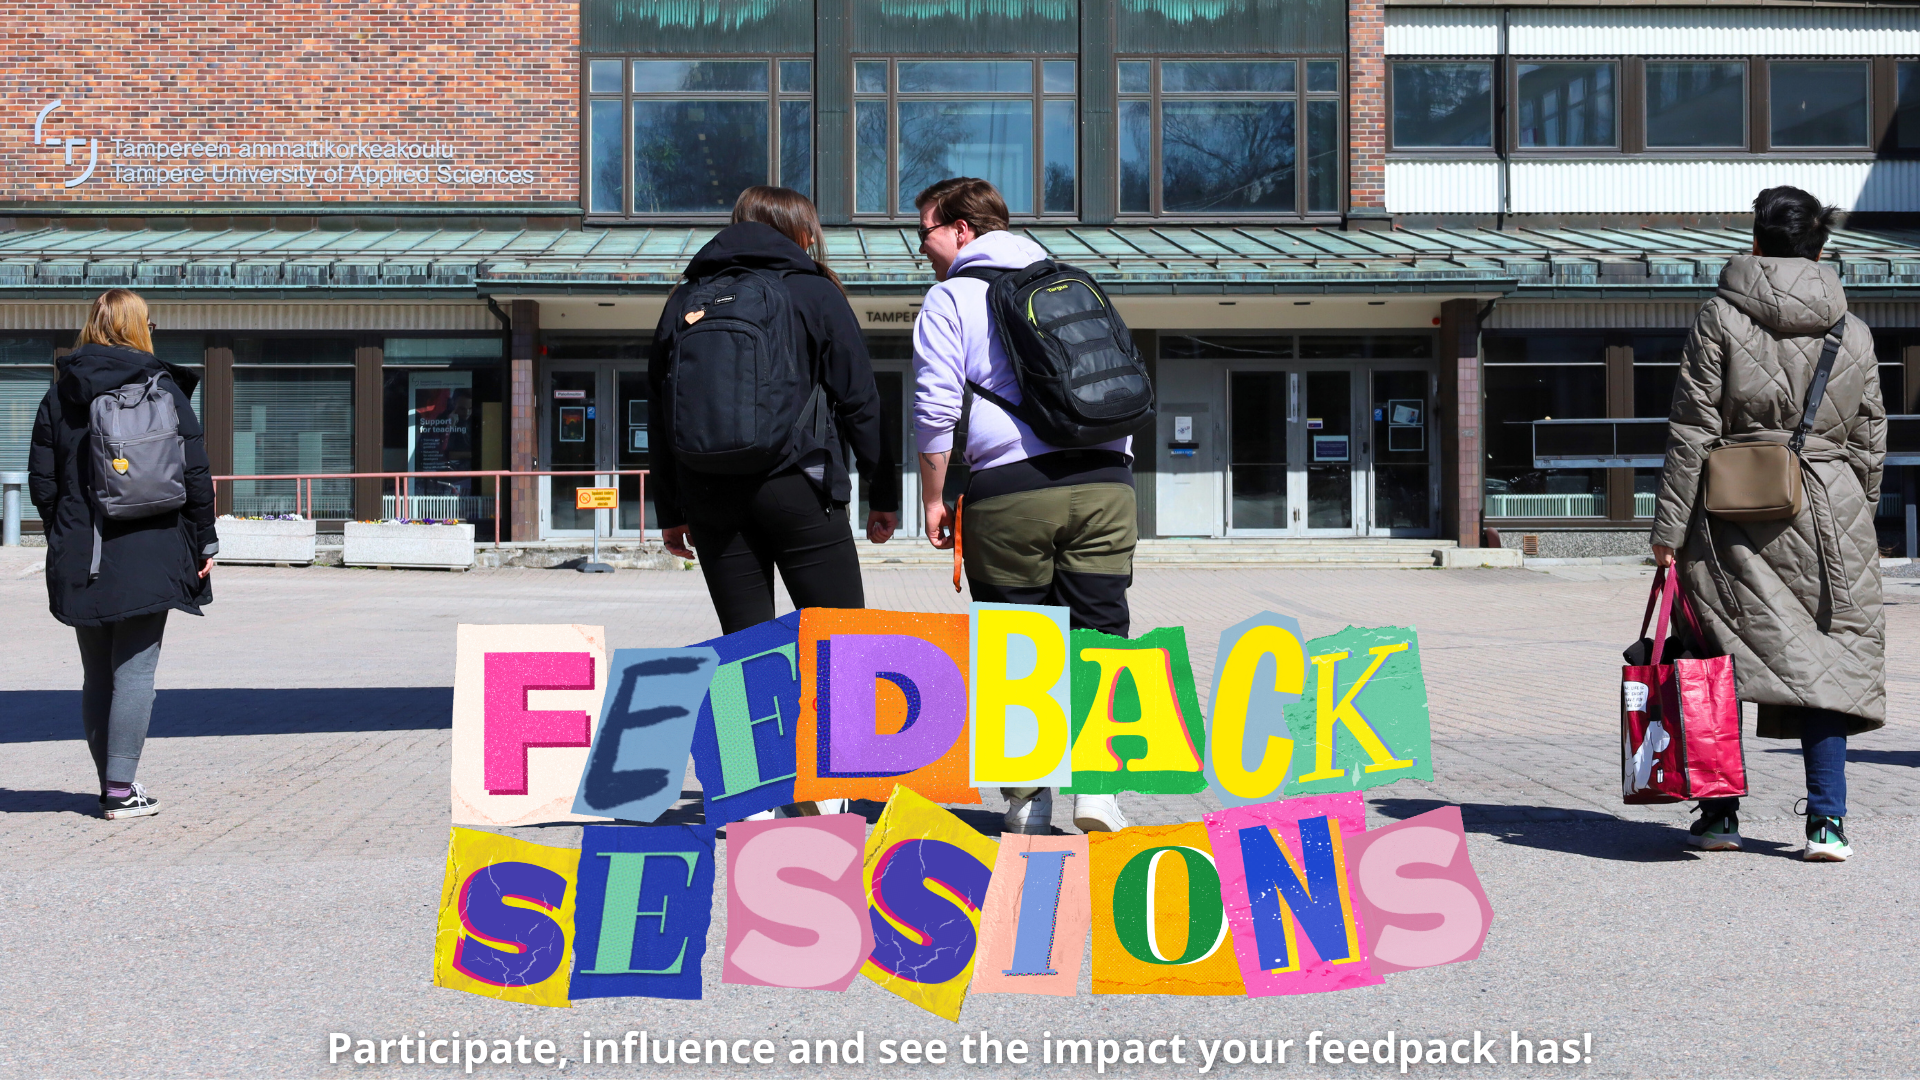 Student, participate in feedback sessions!